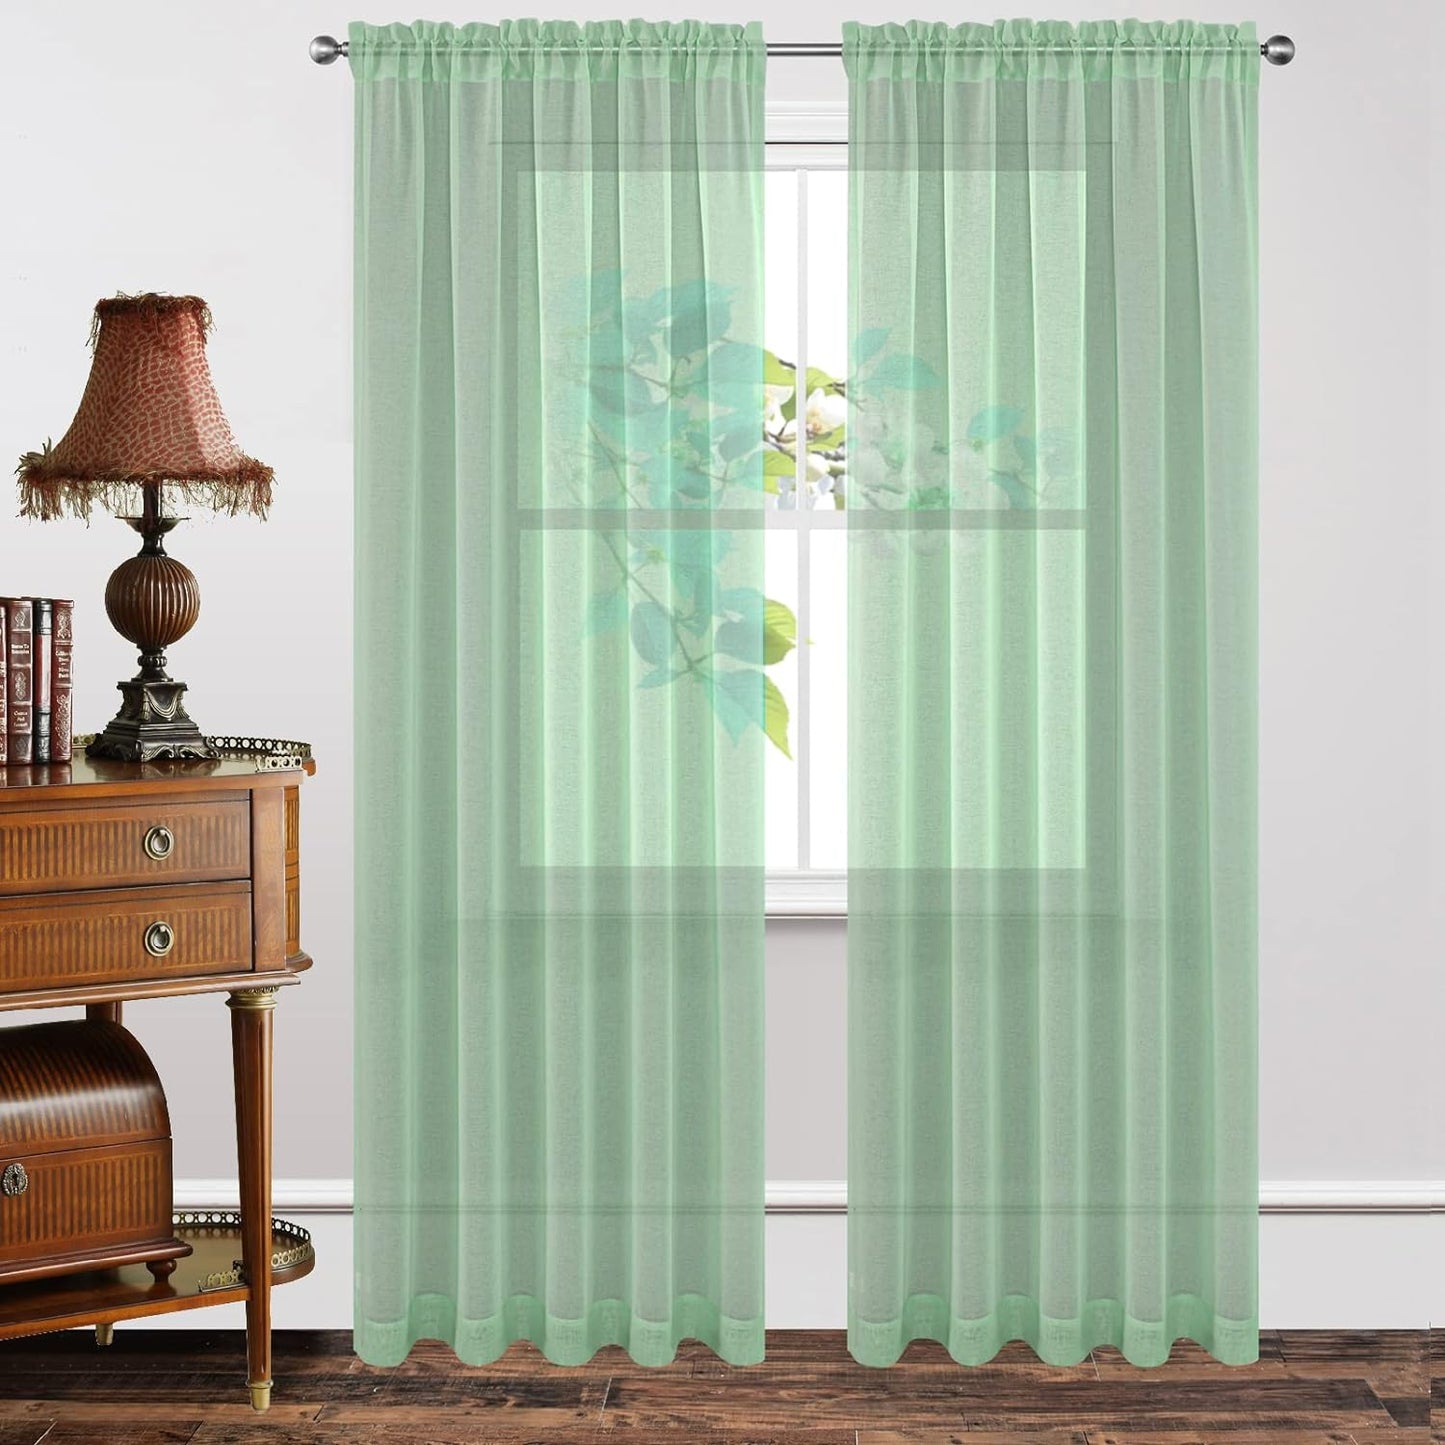 Joydeco White Sheer Curtains 63 Inch Length 2 Panels Set, Rod Pocket Long Sheer Curtains for Window Bedroom Living Room, Lightweight Semi Drape Panels for Yard Patio (54X63 Inch, off White)  Joydeco Mint Green 54W X 84L Inch X 2 Panels 